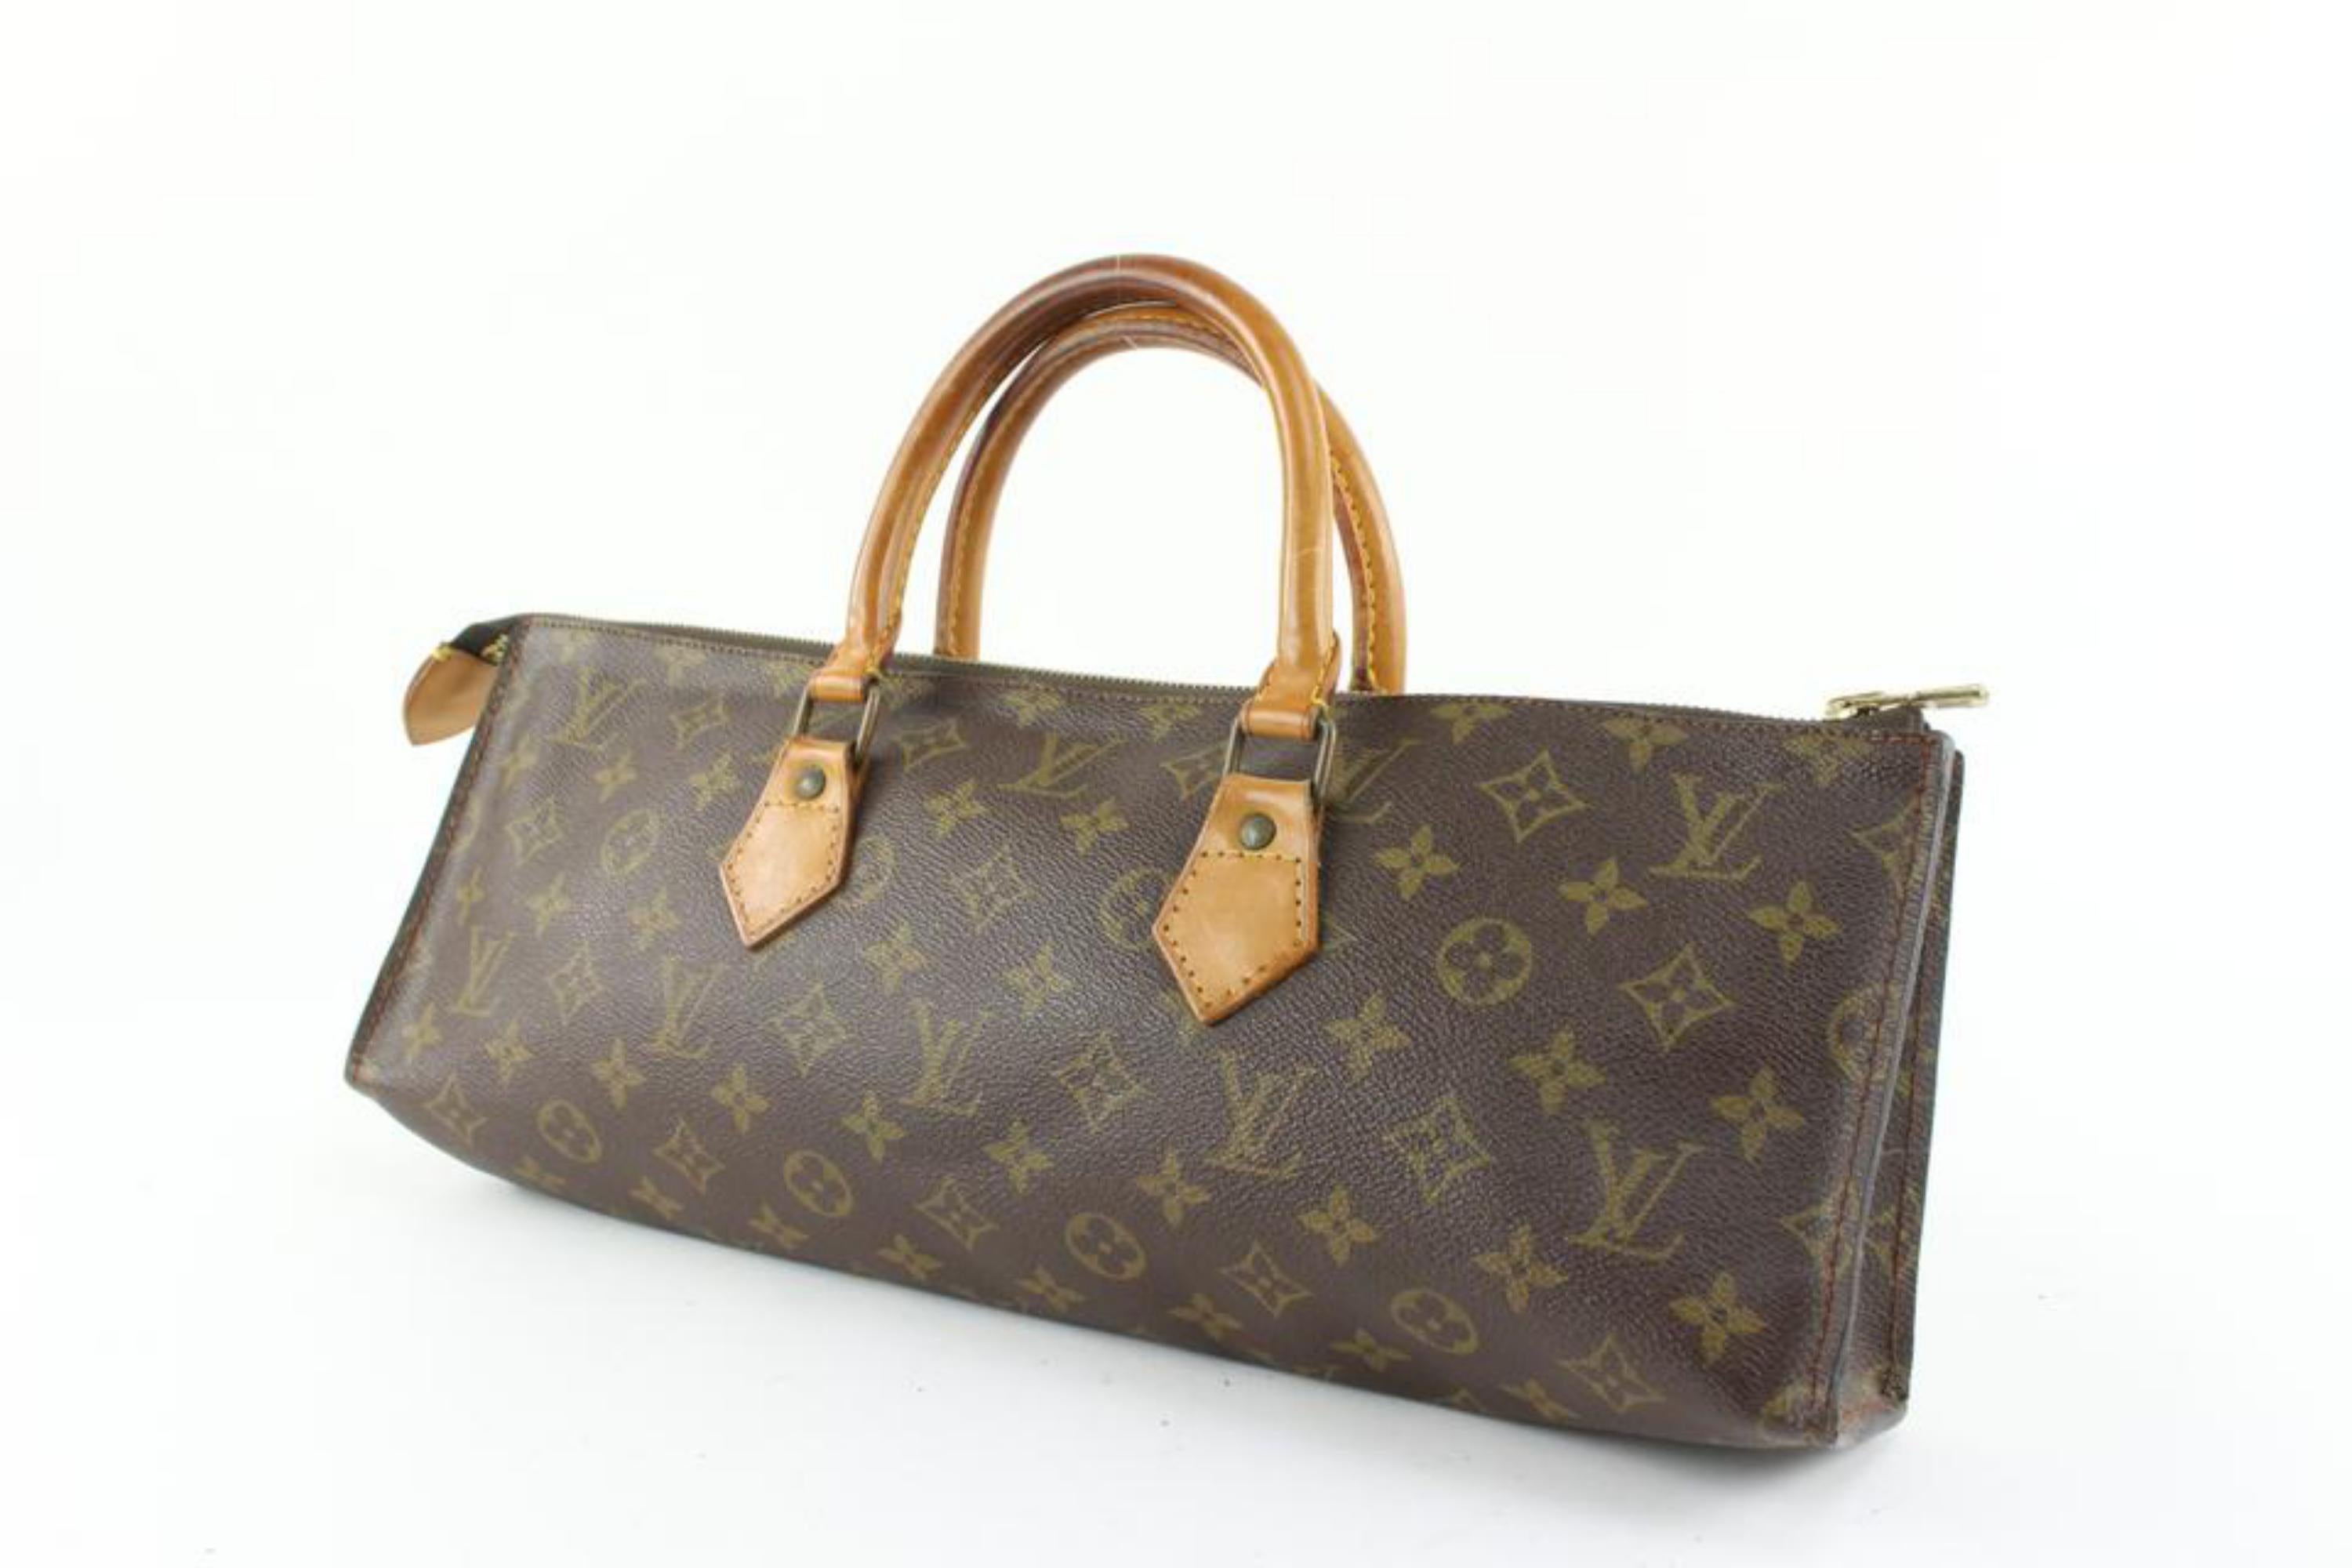 Louis Vuitton Monogram Sac Triangle 1221lv22
Made In: France
Measurements: Length:  15.5